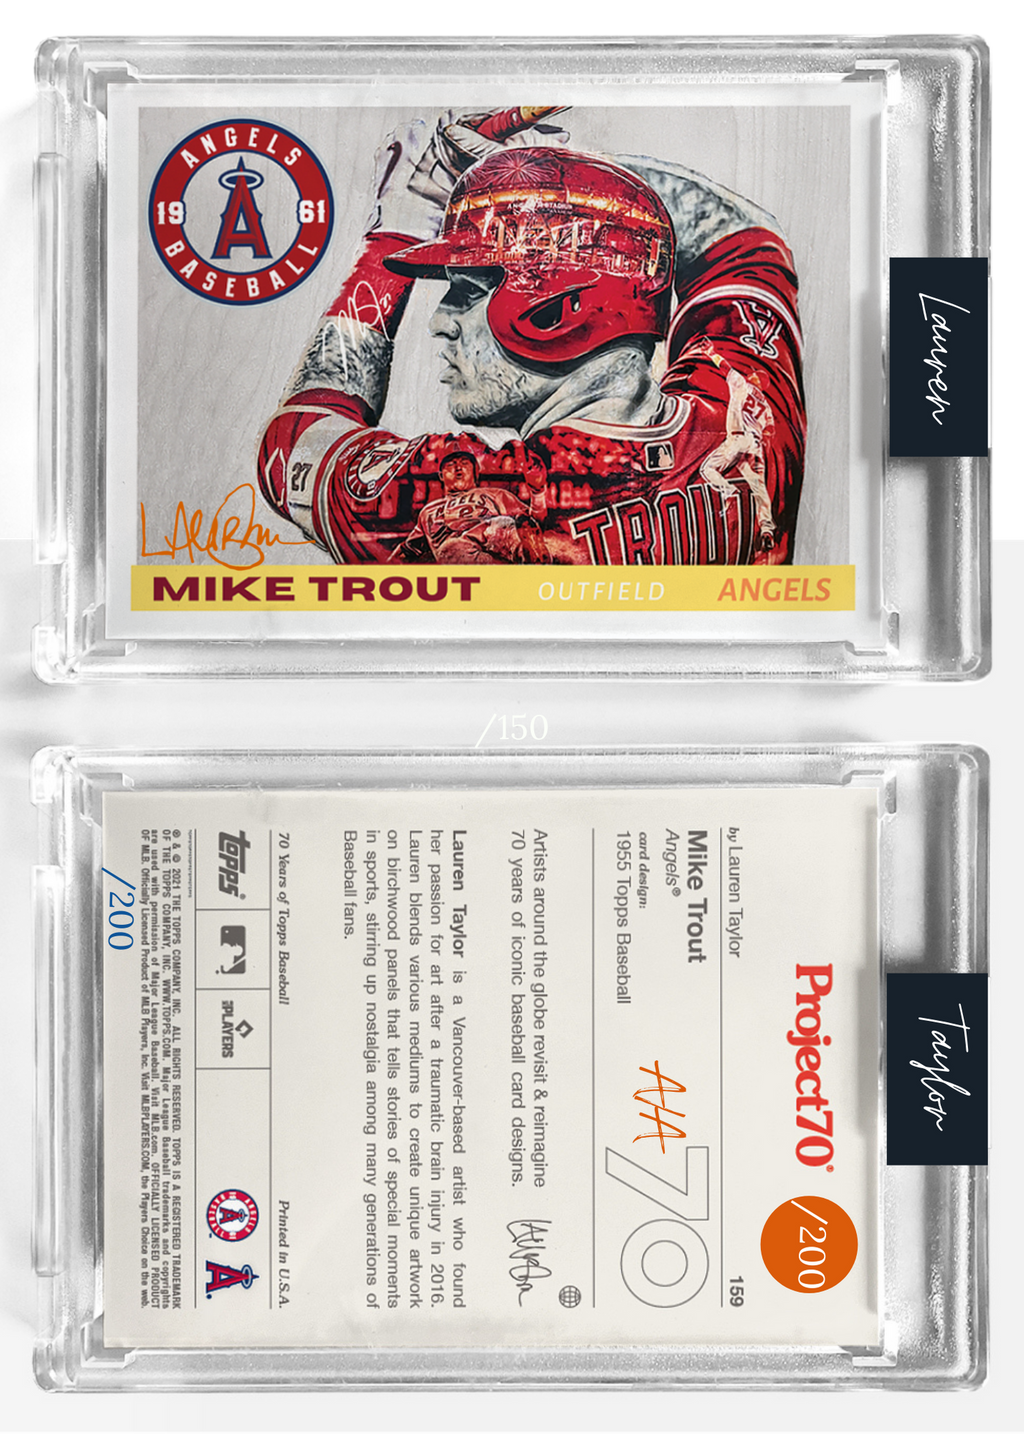 /200 Orange Artist Signature - Topps Project 70 130pt card #159 by Lauren Taylor - Mike Trout